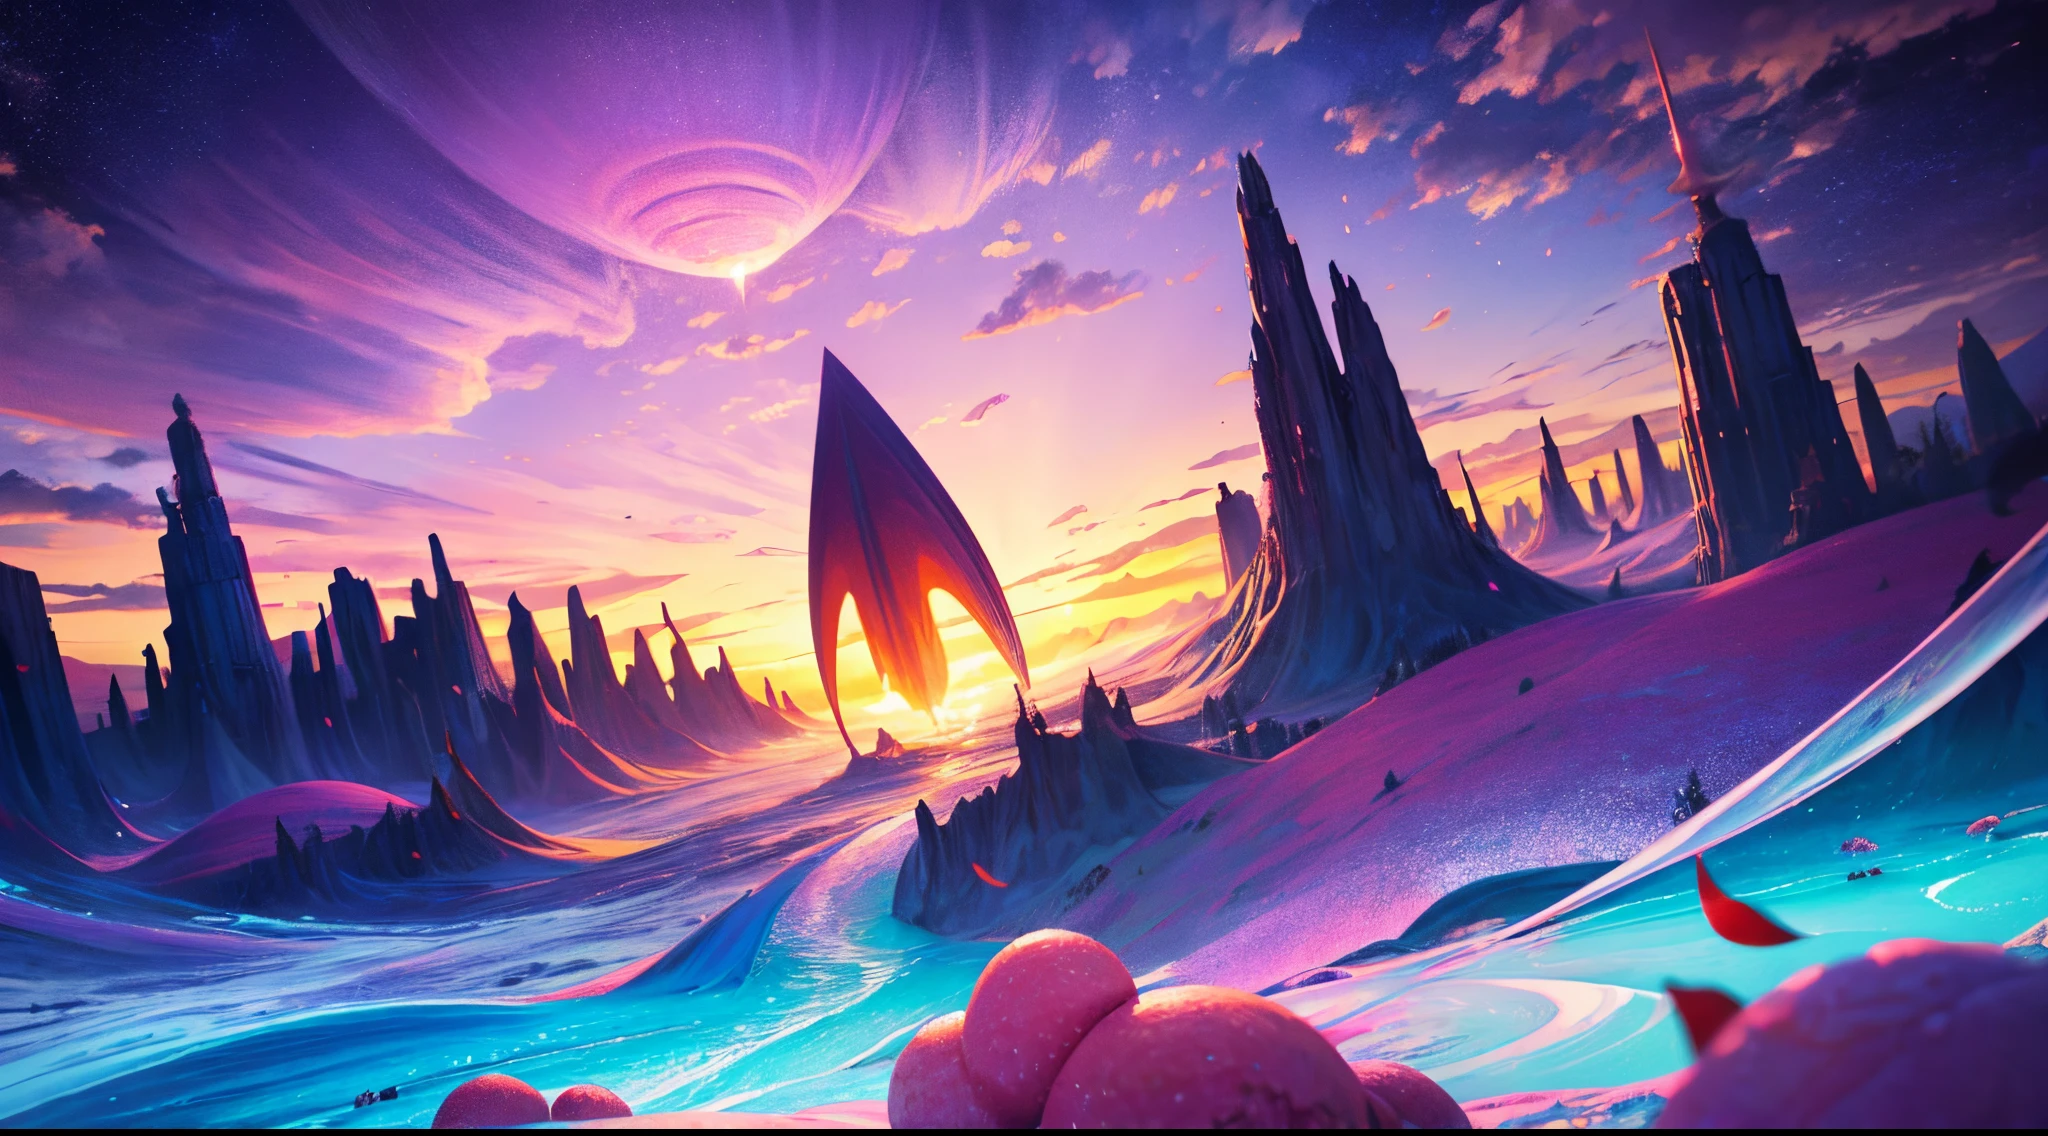 Challenge AI to forge an otherworldly candy land, merging surreal elements like floating candies, cascading chocolate waterfalls, and ethereal candy clouds. Aim for UHD resolution to enhance the dreamlike quality.